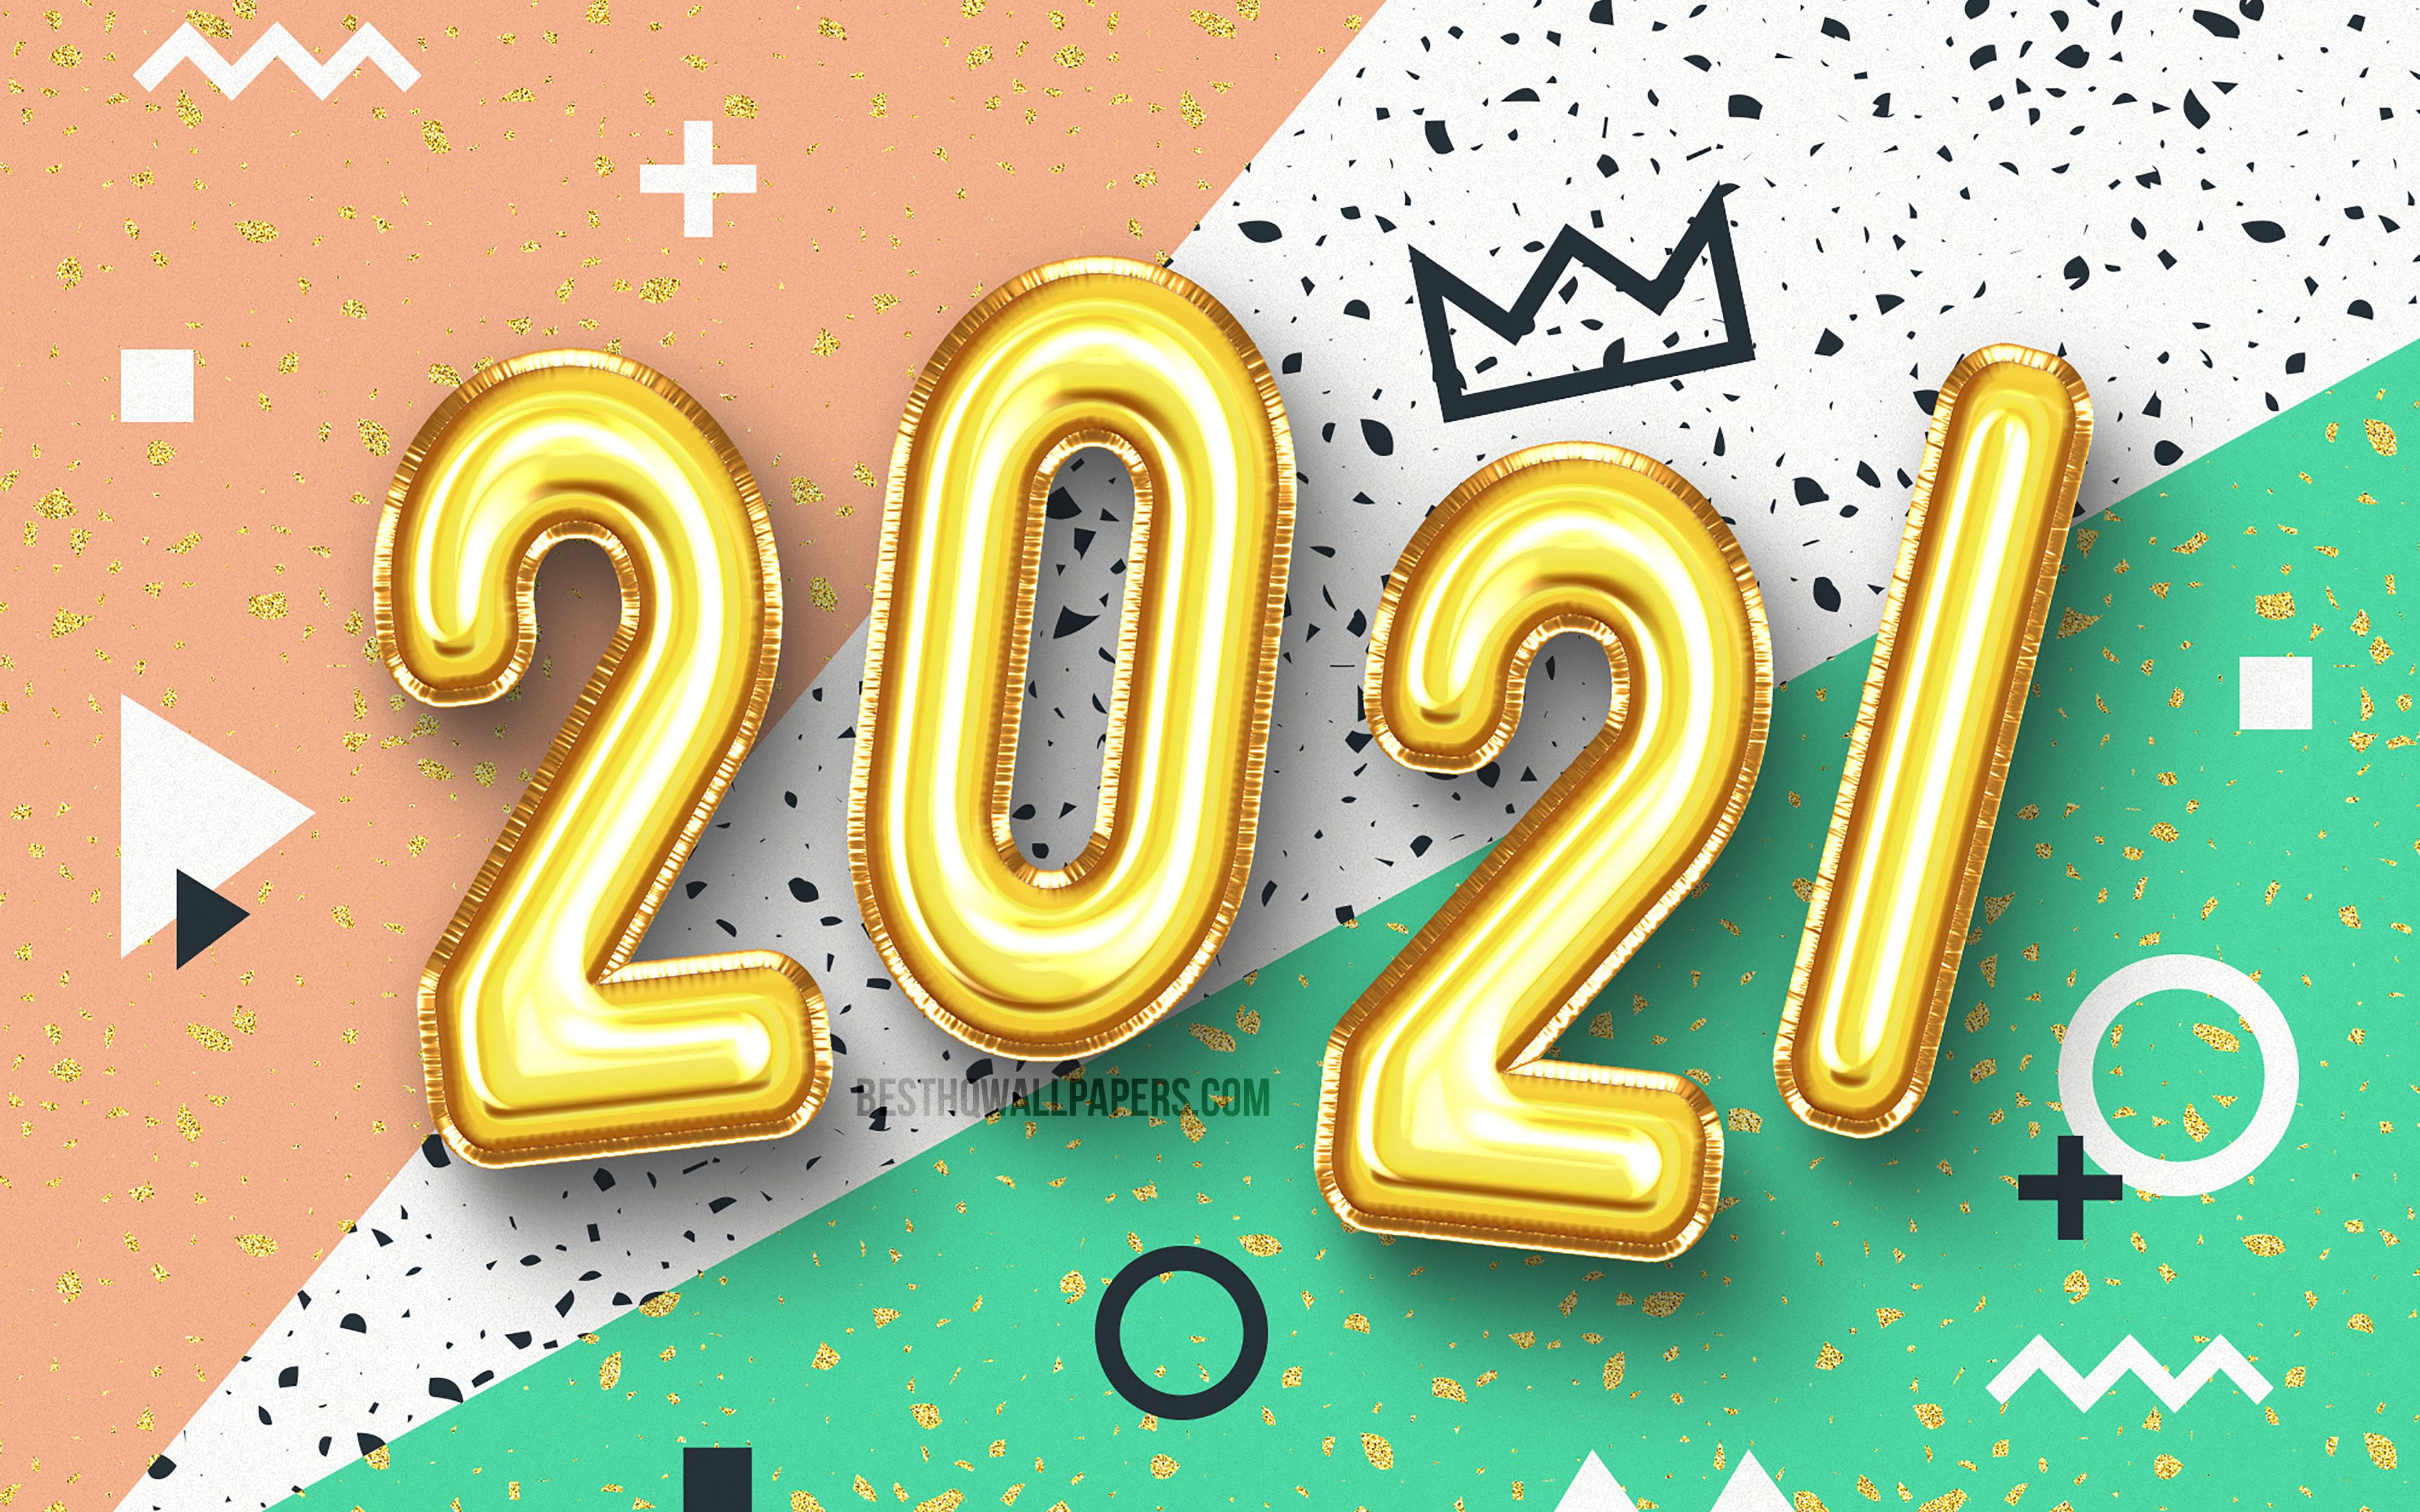 Download wallpapers 4k, Happy New Year 2021, golden balloons digits, 2021 concepts, 2021 year digits, 2021 new year, 2021 on colorful background, 2021 New Year for desktop with resolution 3840x2400. High Quality HD pictures wallpapers